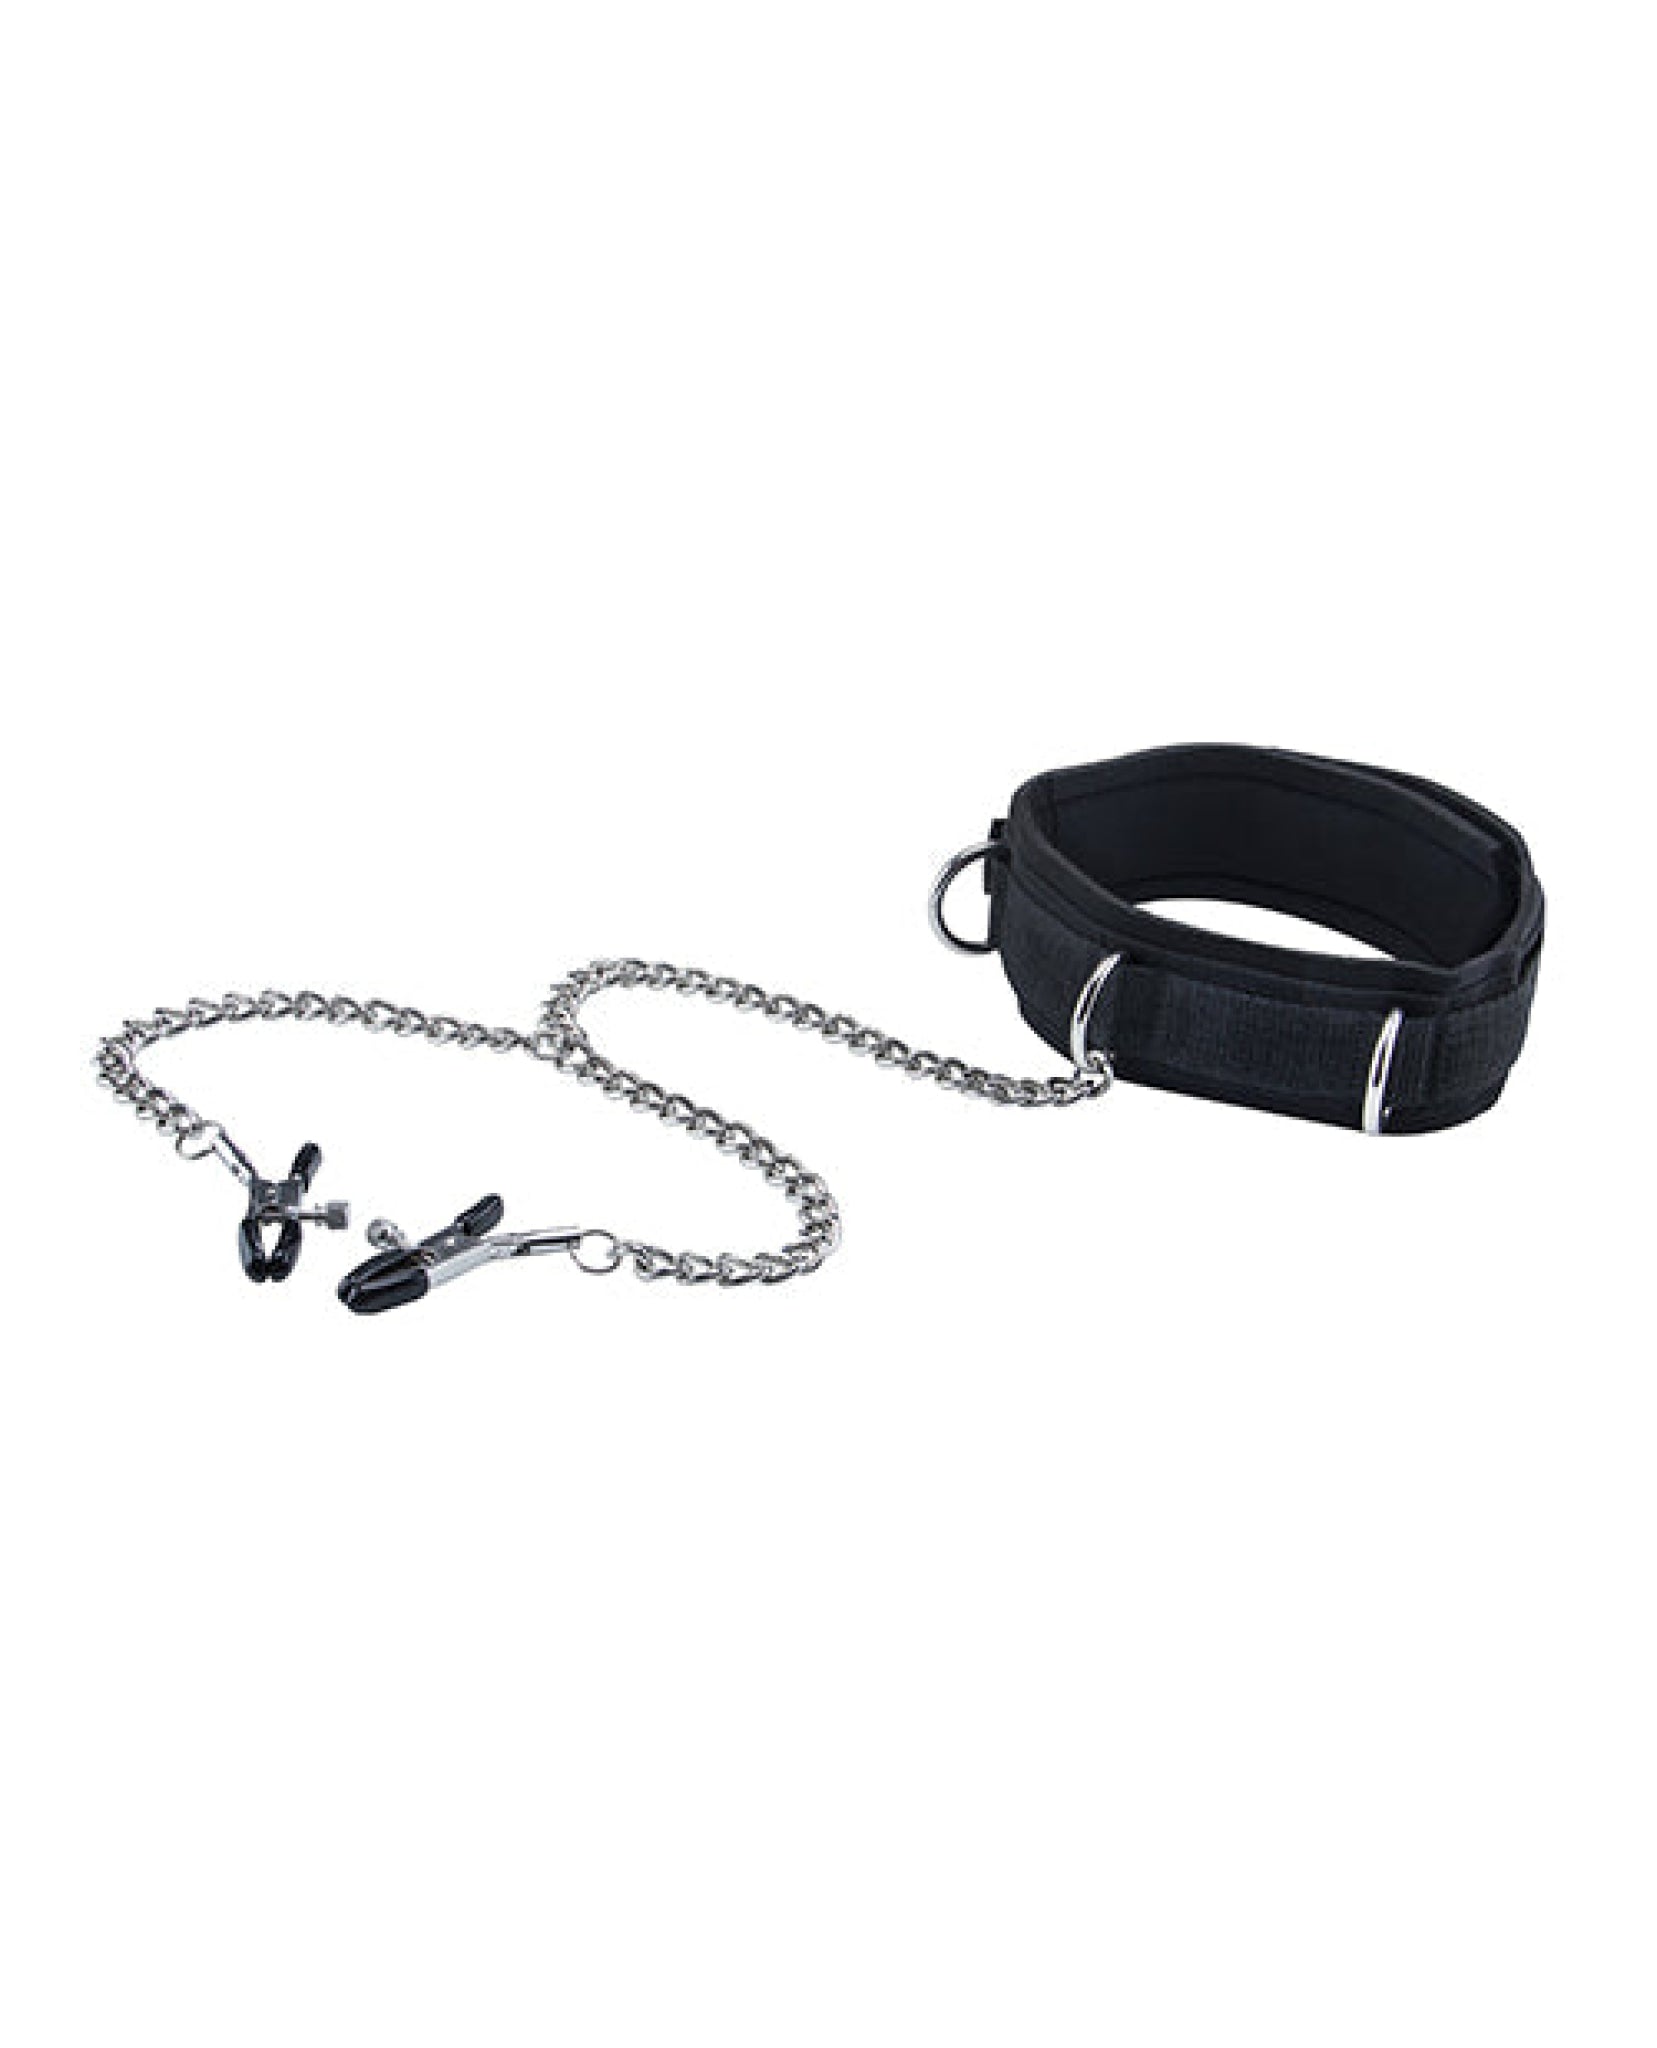 Shots Ouch Black & White Velcro Collar W-nipple Clamps - Black Shots